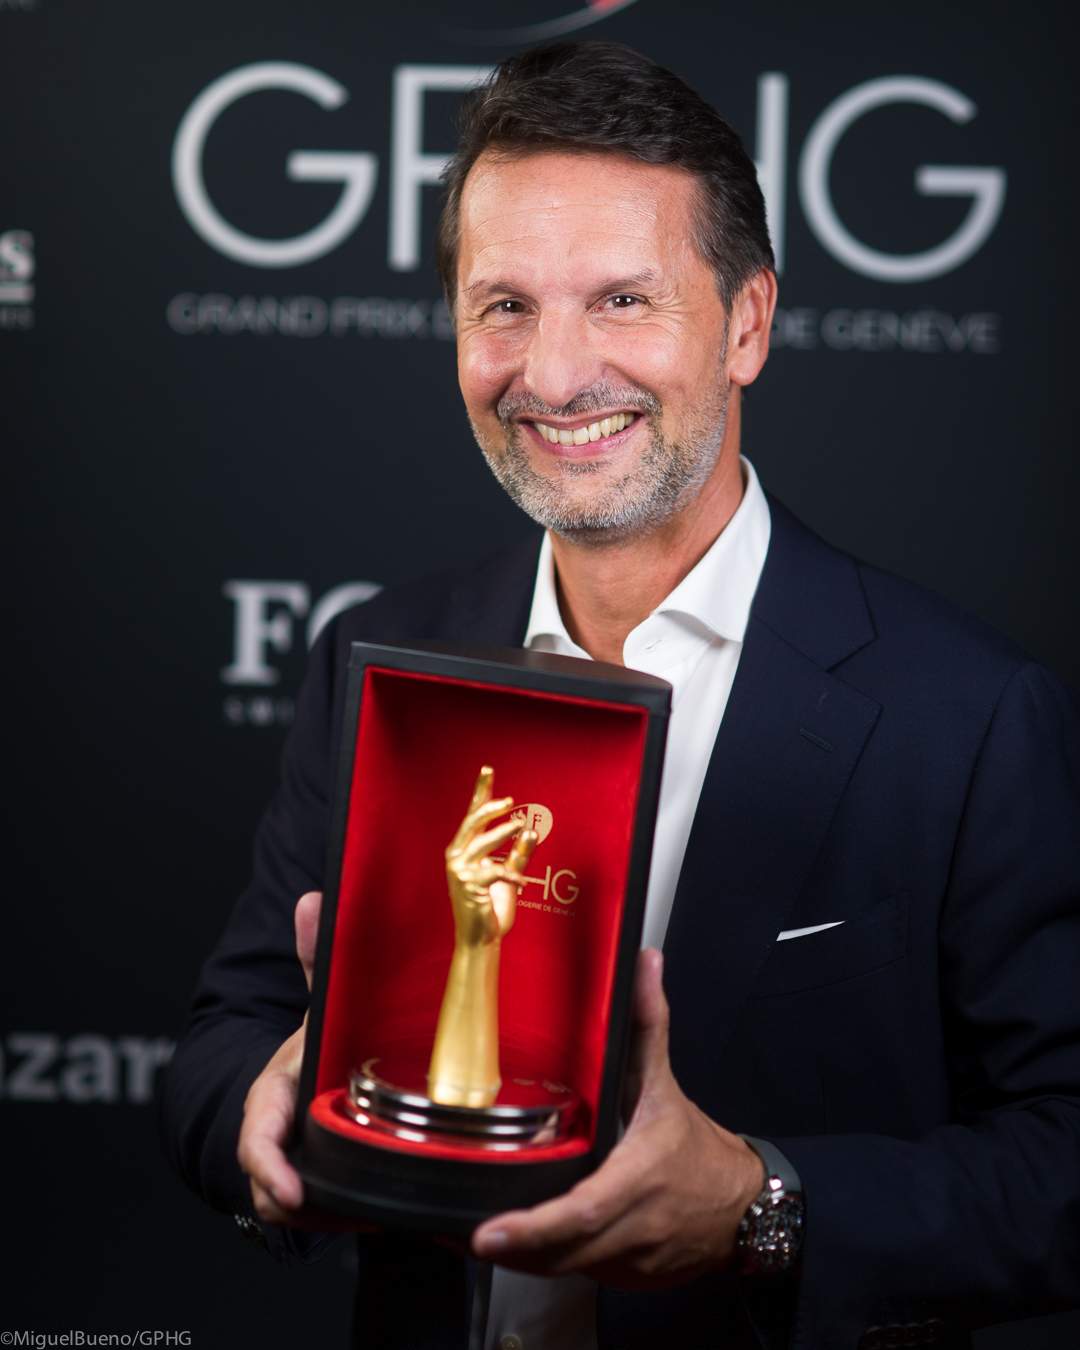 Maximilian Büsser,  Owner and creative director of MB&amp;F,  winner of the “Aiguille d’Or” Grand Prix 2022